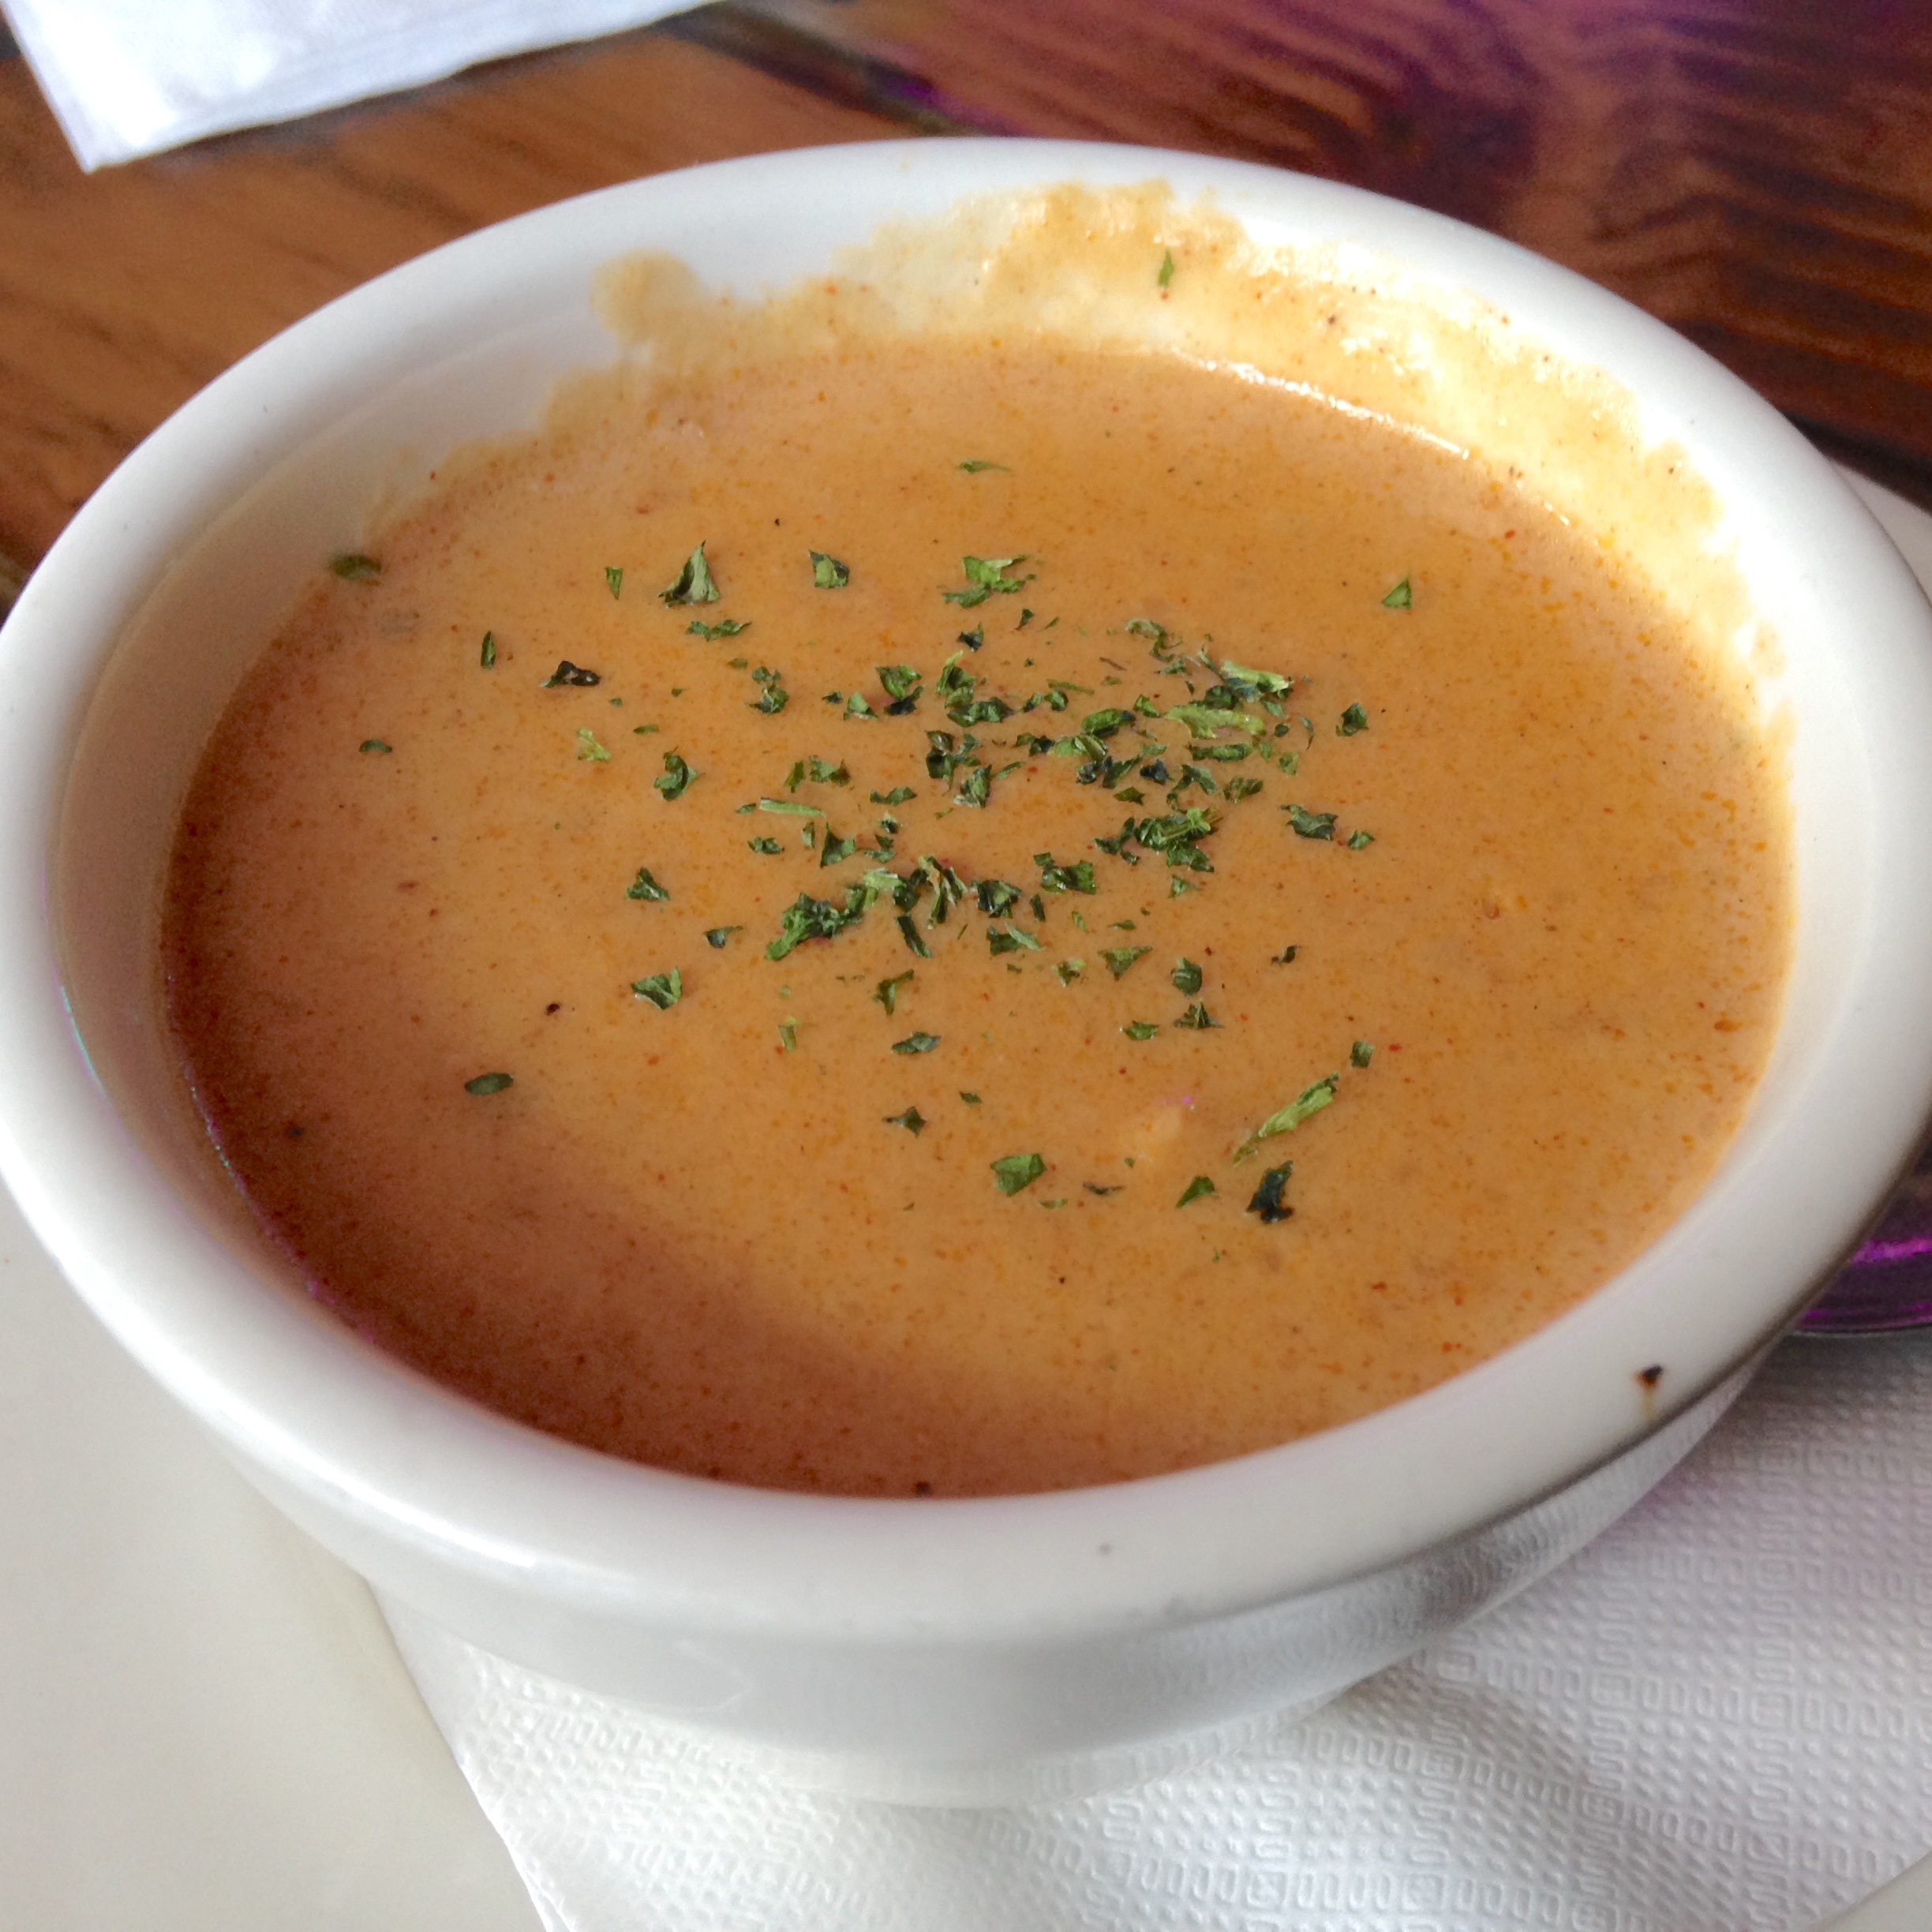 The Lobster Bisque from The Fish House in Miami, Florida